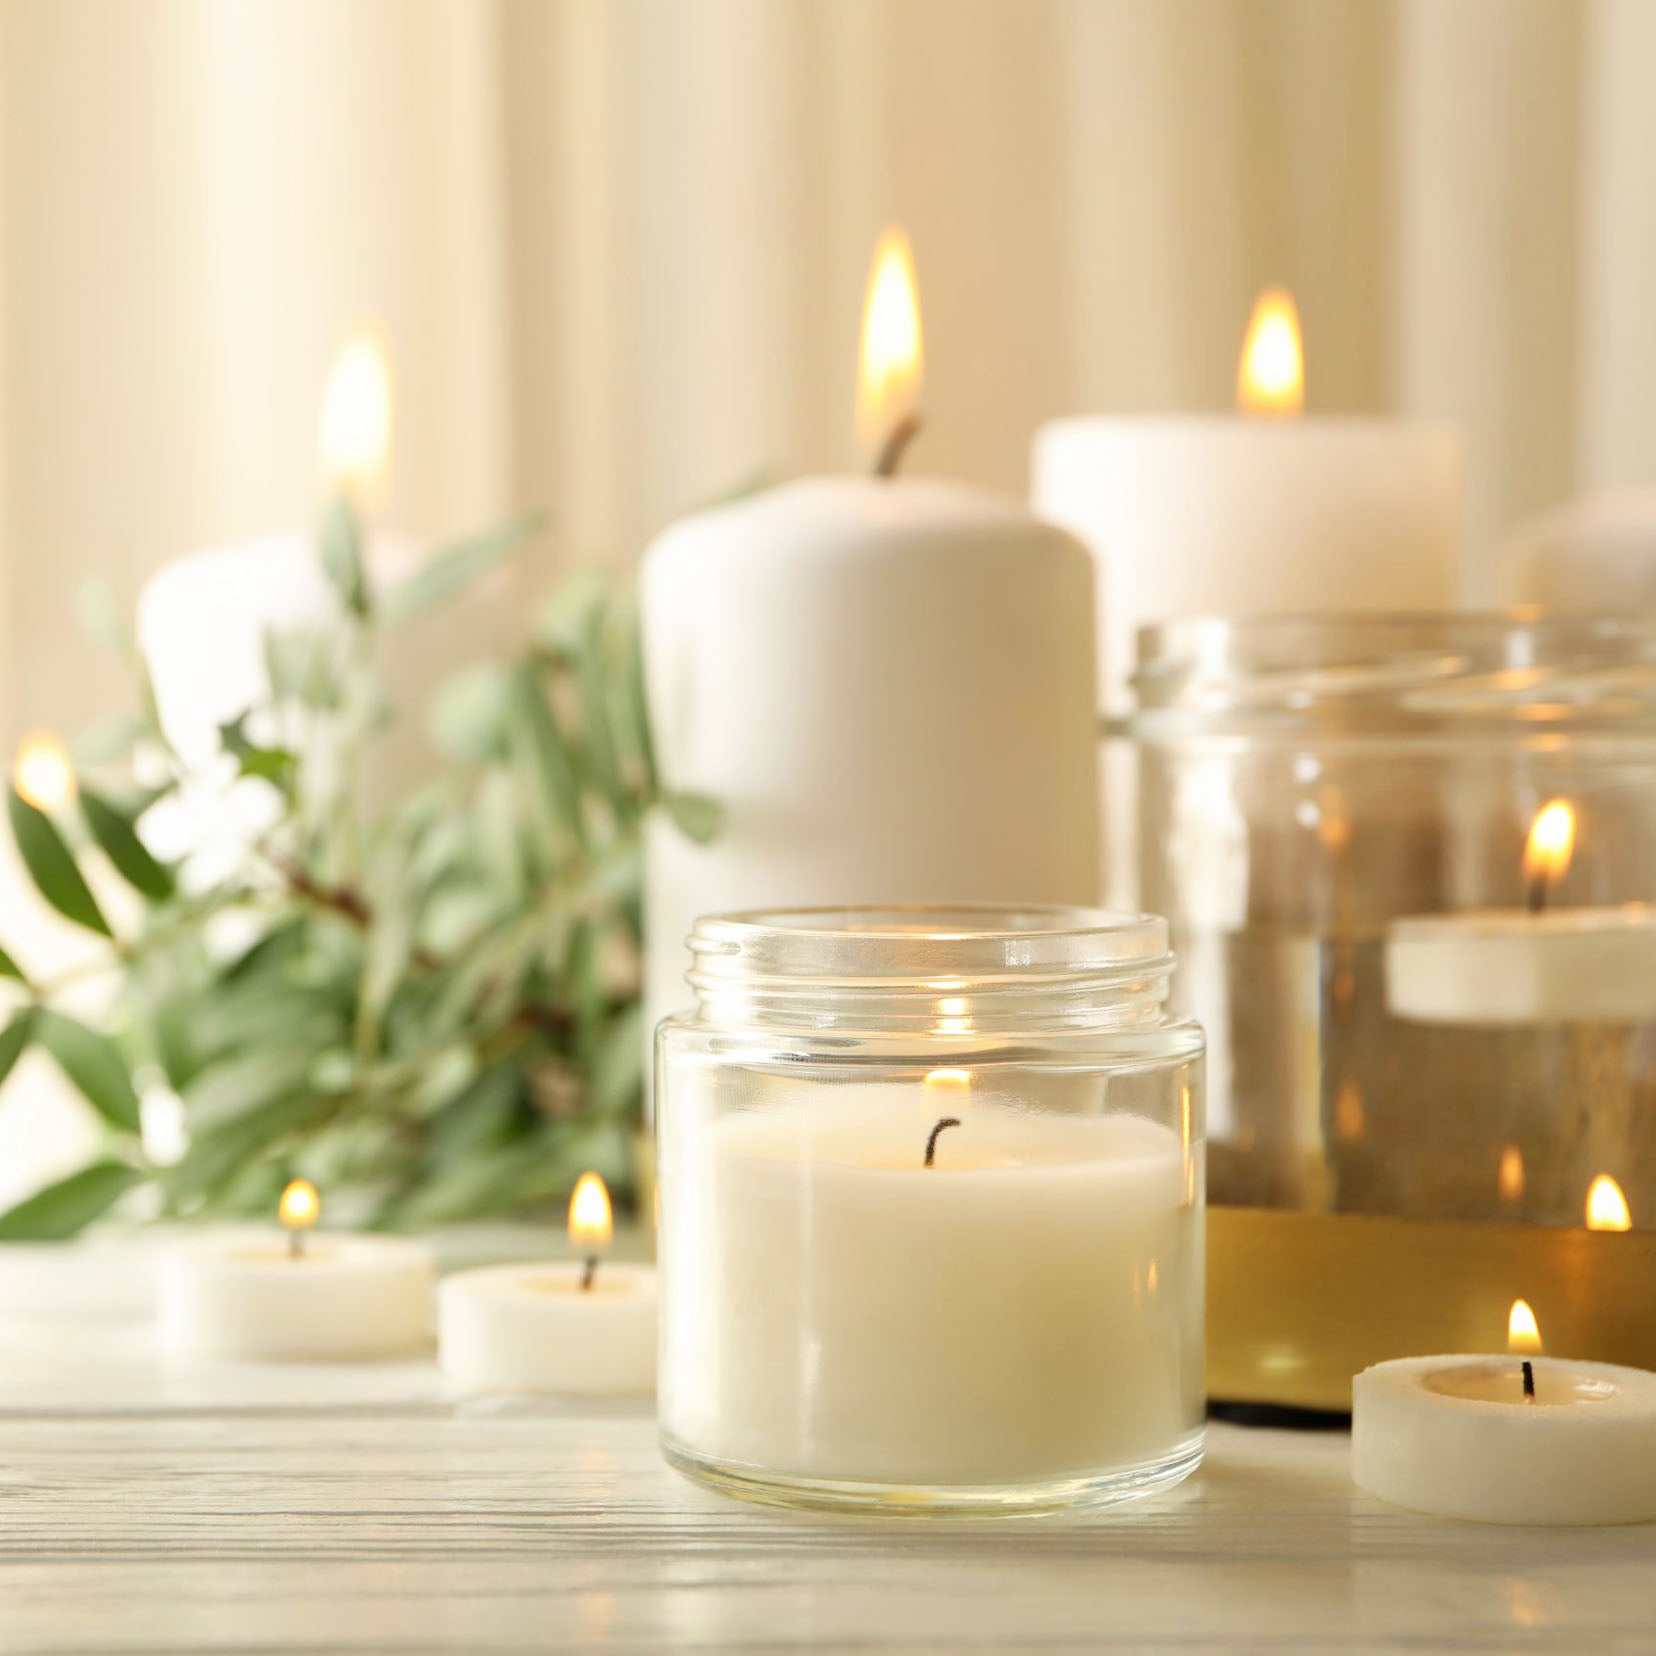 Calm & Tranquil Fragrance Oil | Truly Personal | Candles, Wax Melts, Soap, Bath Bombs